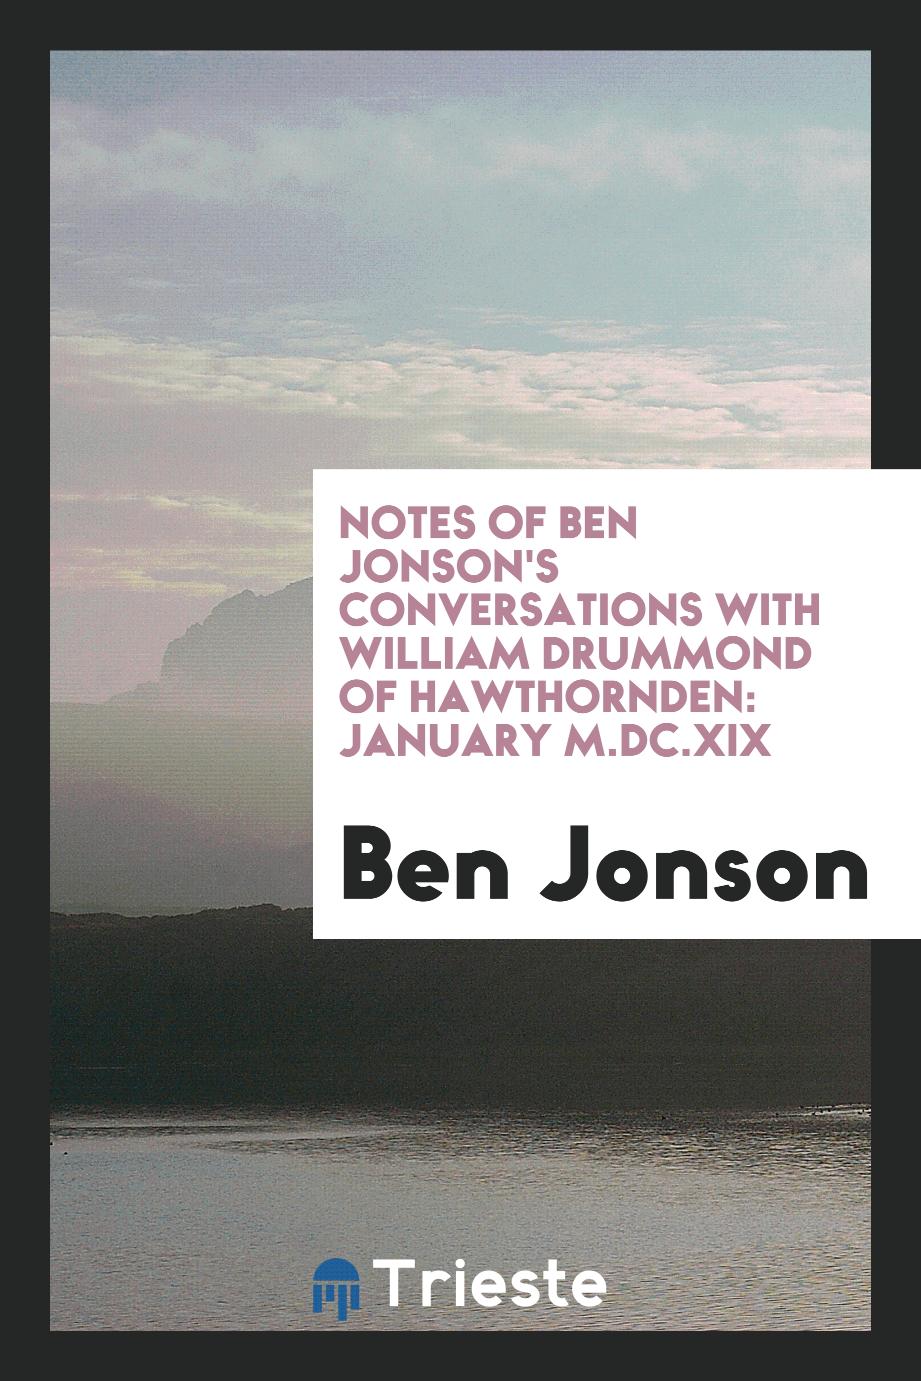 Notes of Ben Jonson's Conversations with William Drummond of Hawthornden: January M.DC.XIX